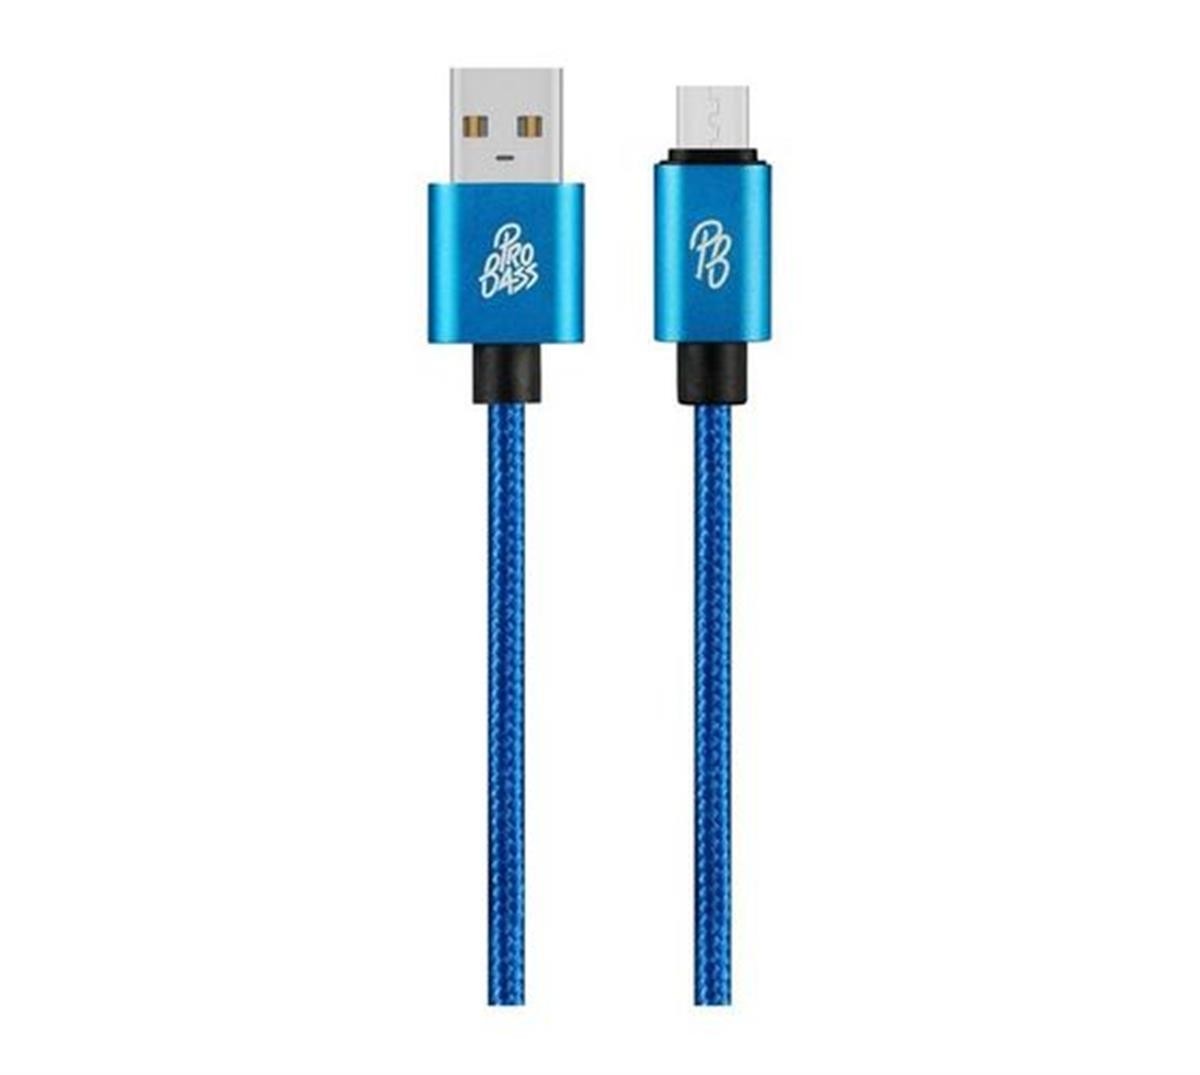 Pro Bass Braided 1.5M Charging Cable